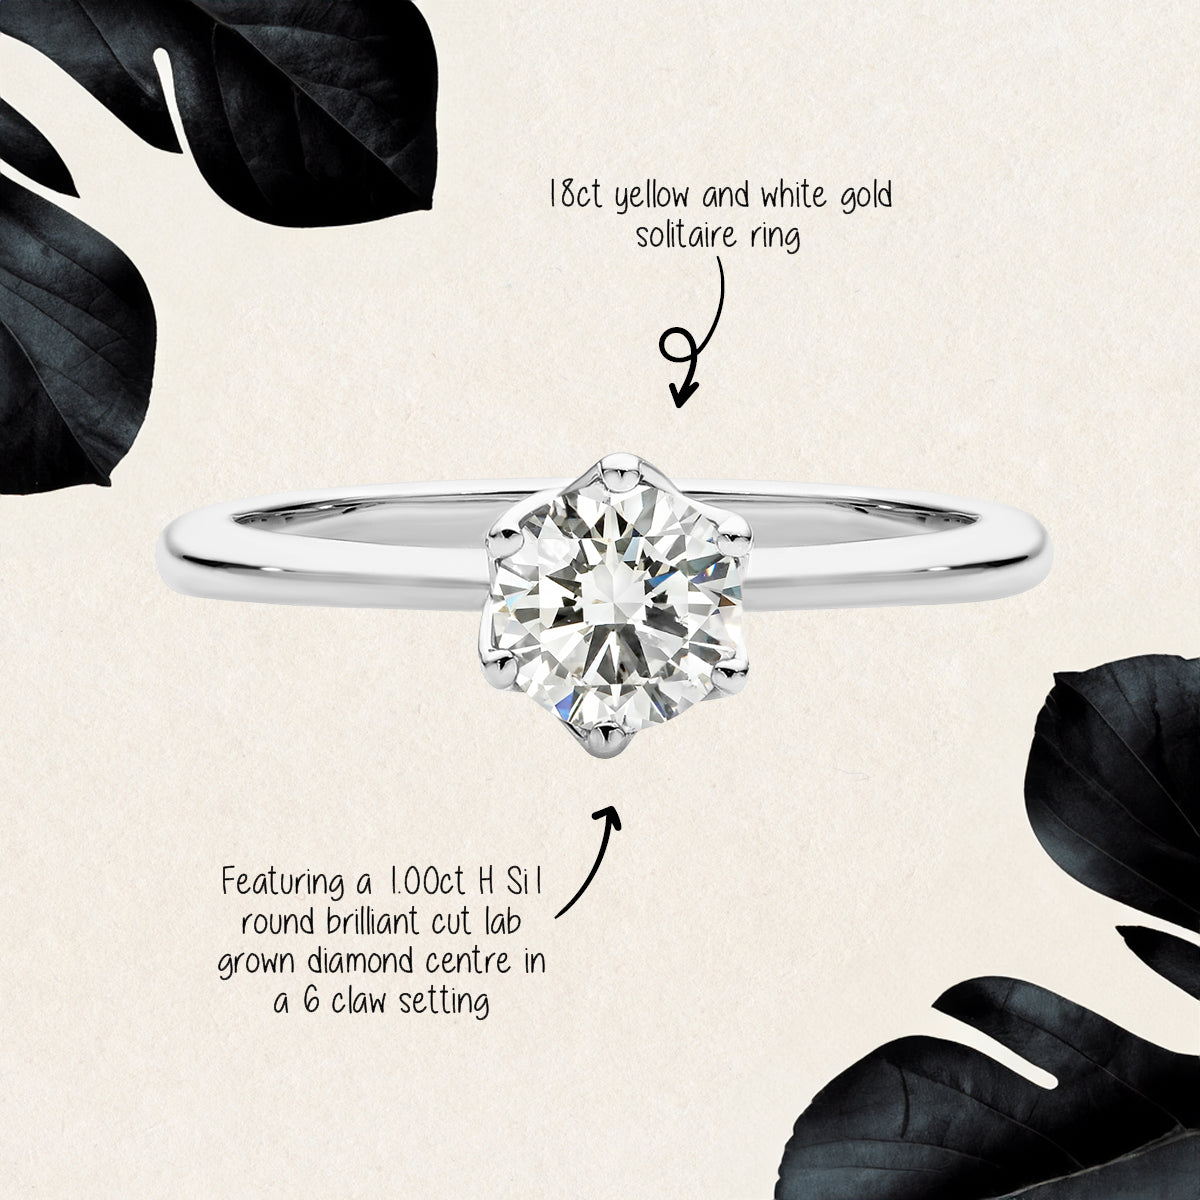 Featuring 1.00ct H SI round brilliant cut lab grown diamond solitaire ring by greenhouse diamonds